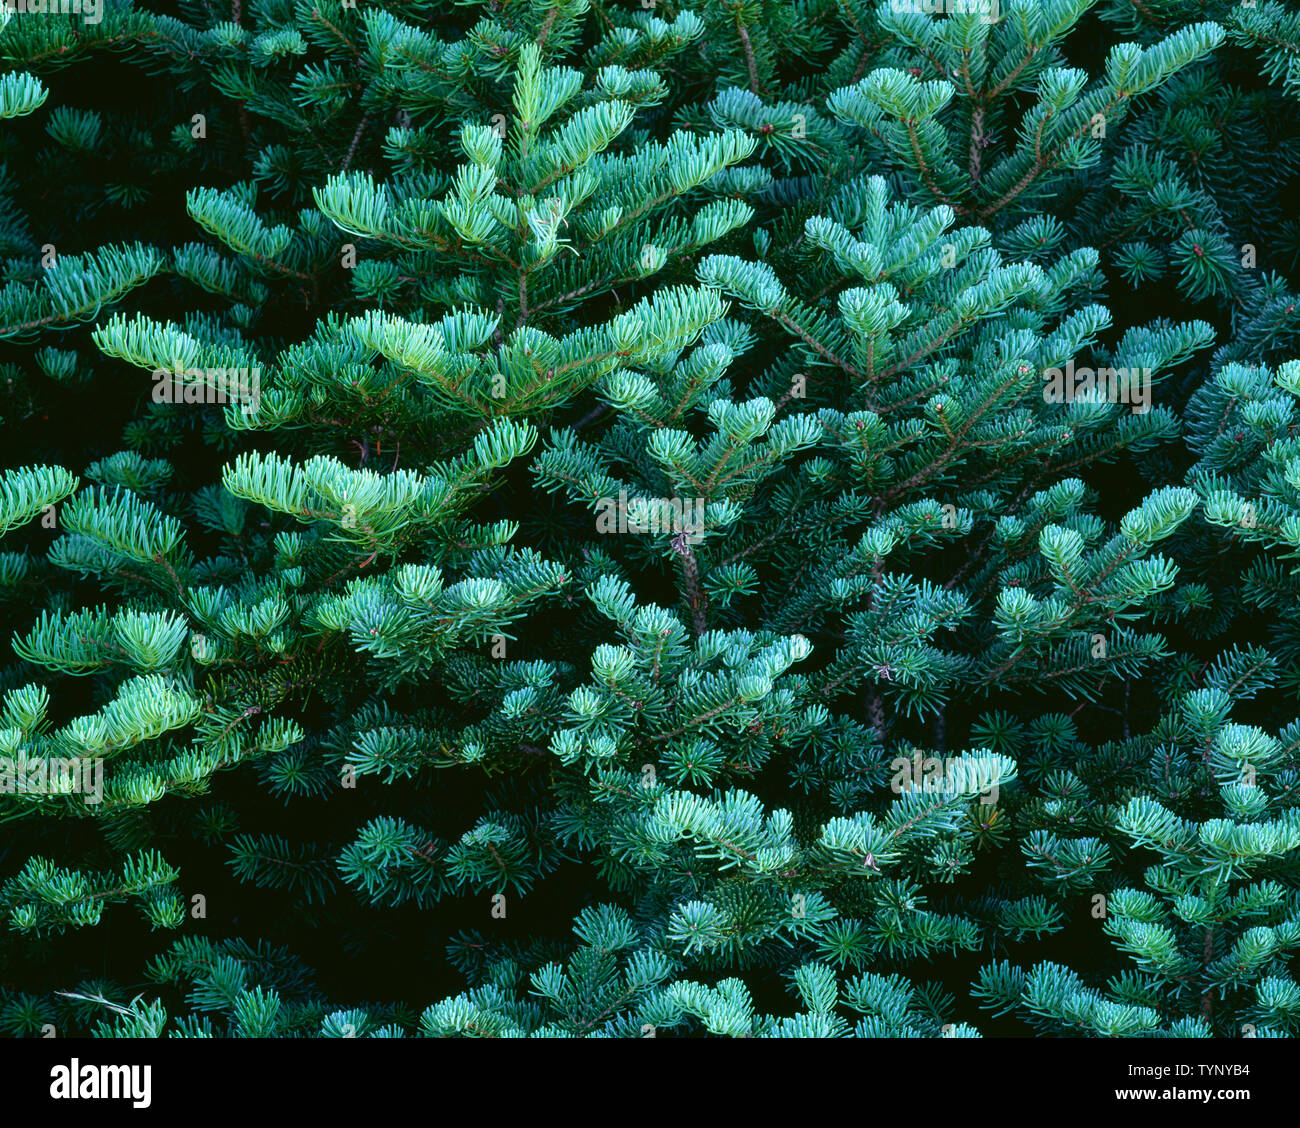 USA, Washington, Olympic National Park, Spring growth of new needles of subalpine fir (Abies lasoicarpa); from Blue Mountain. Stock Photo